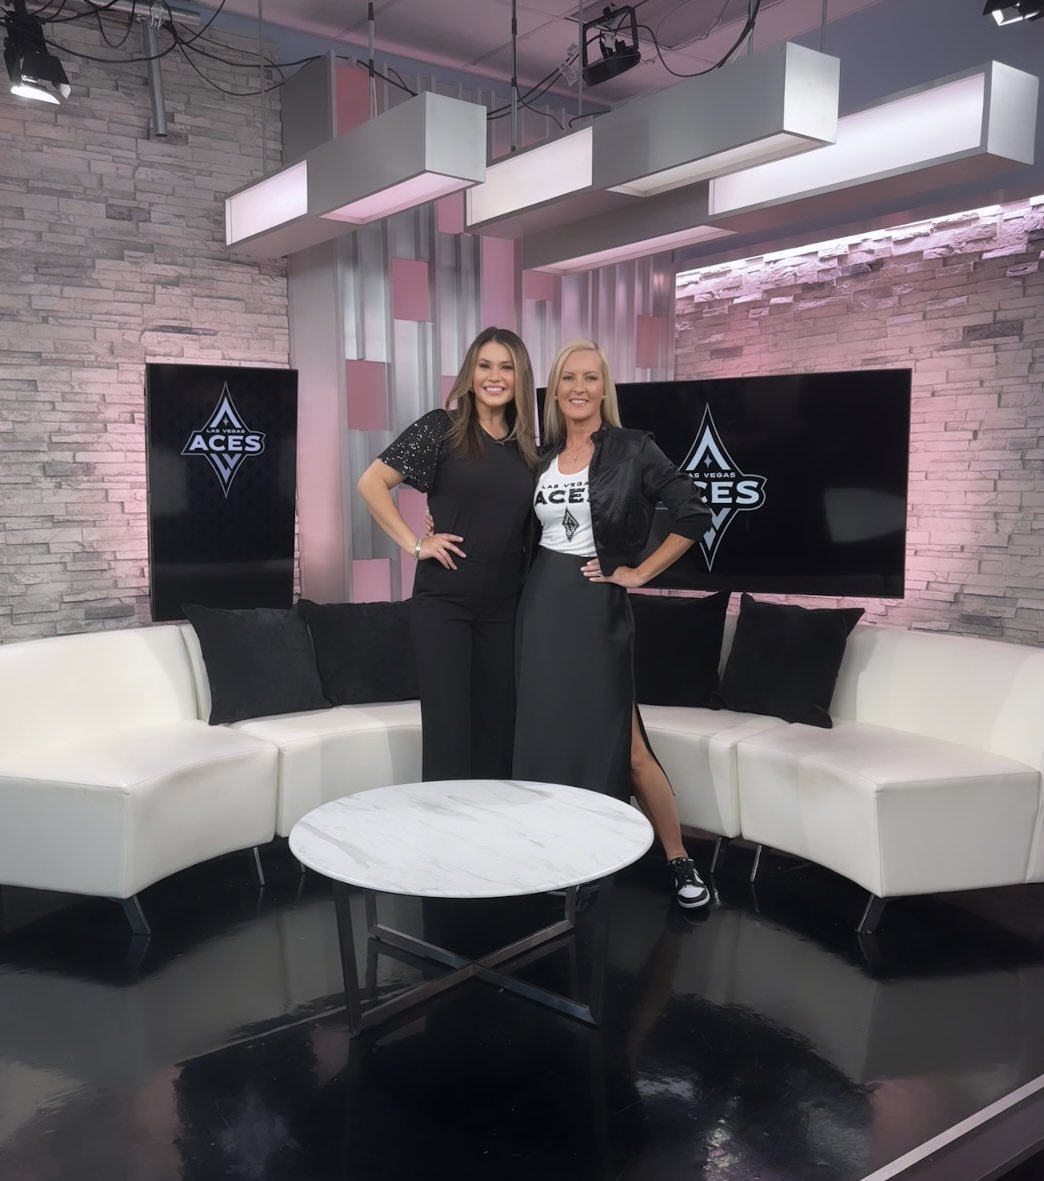 I had a great time sitting down & chatting w/my girl @palomavillicana at @fox5vegas about hosting for the @lvaces for the past 7 years. We also chatted about “In The Paint” with the Las Vegas Aces & what this season means to me personally after losing my mom just weeks ago.